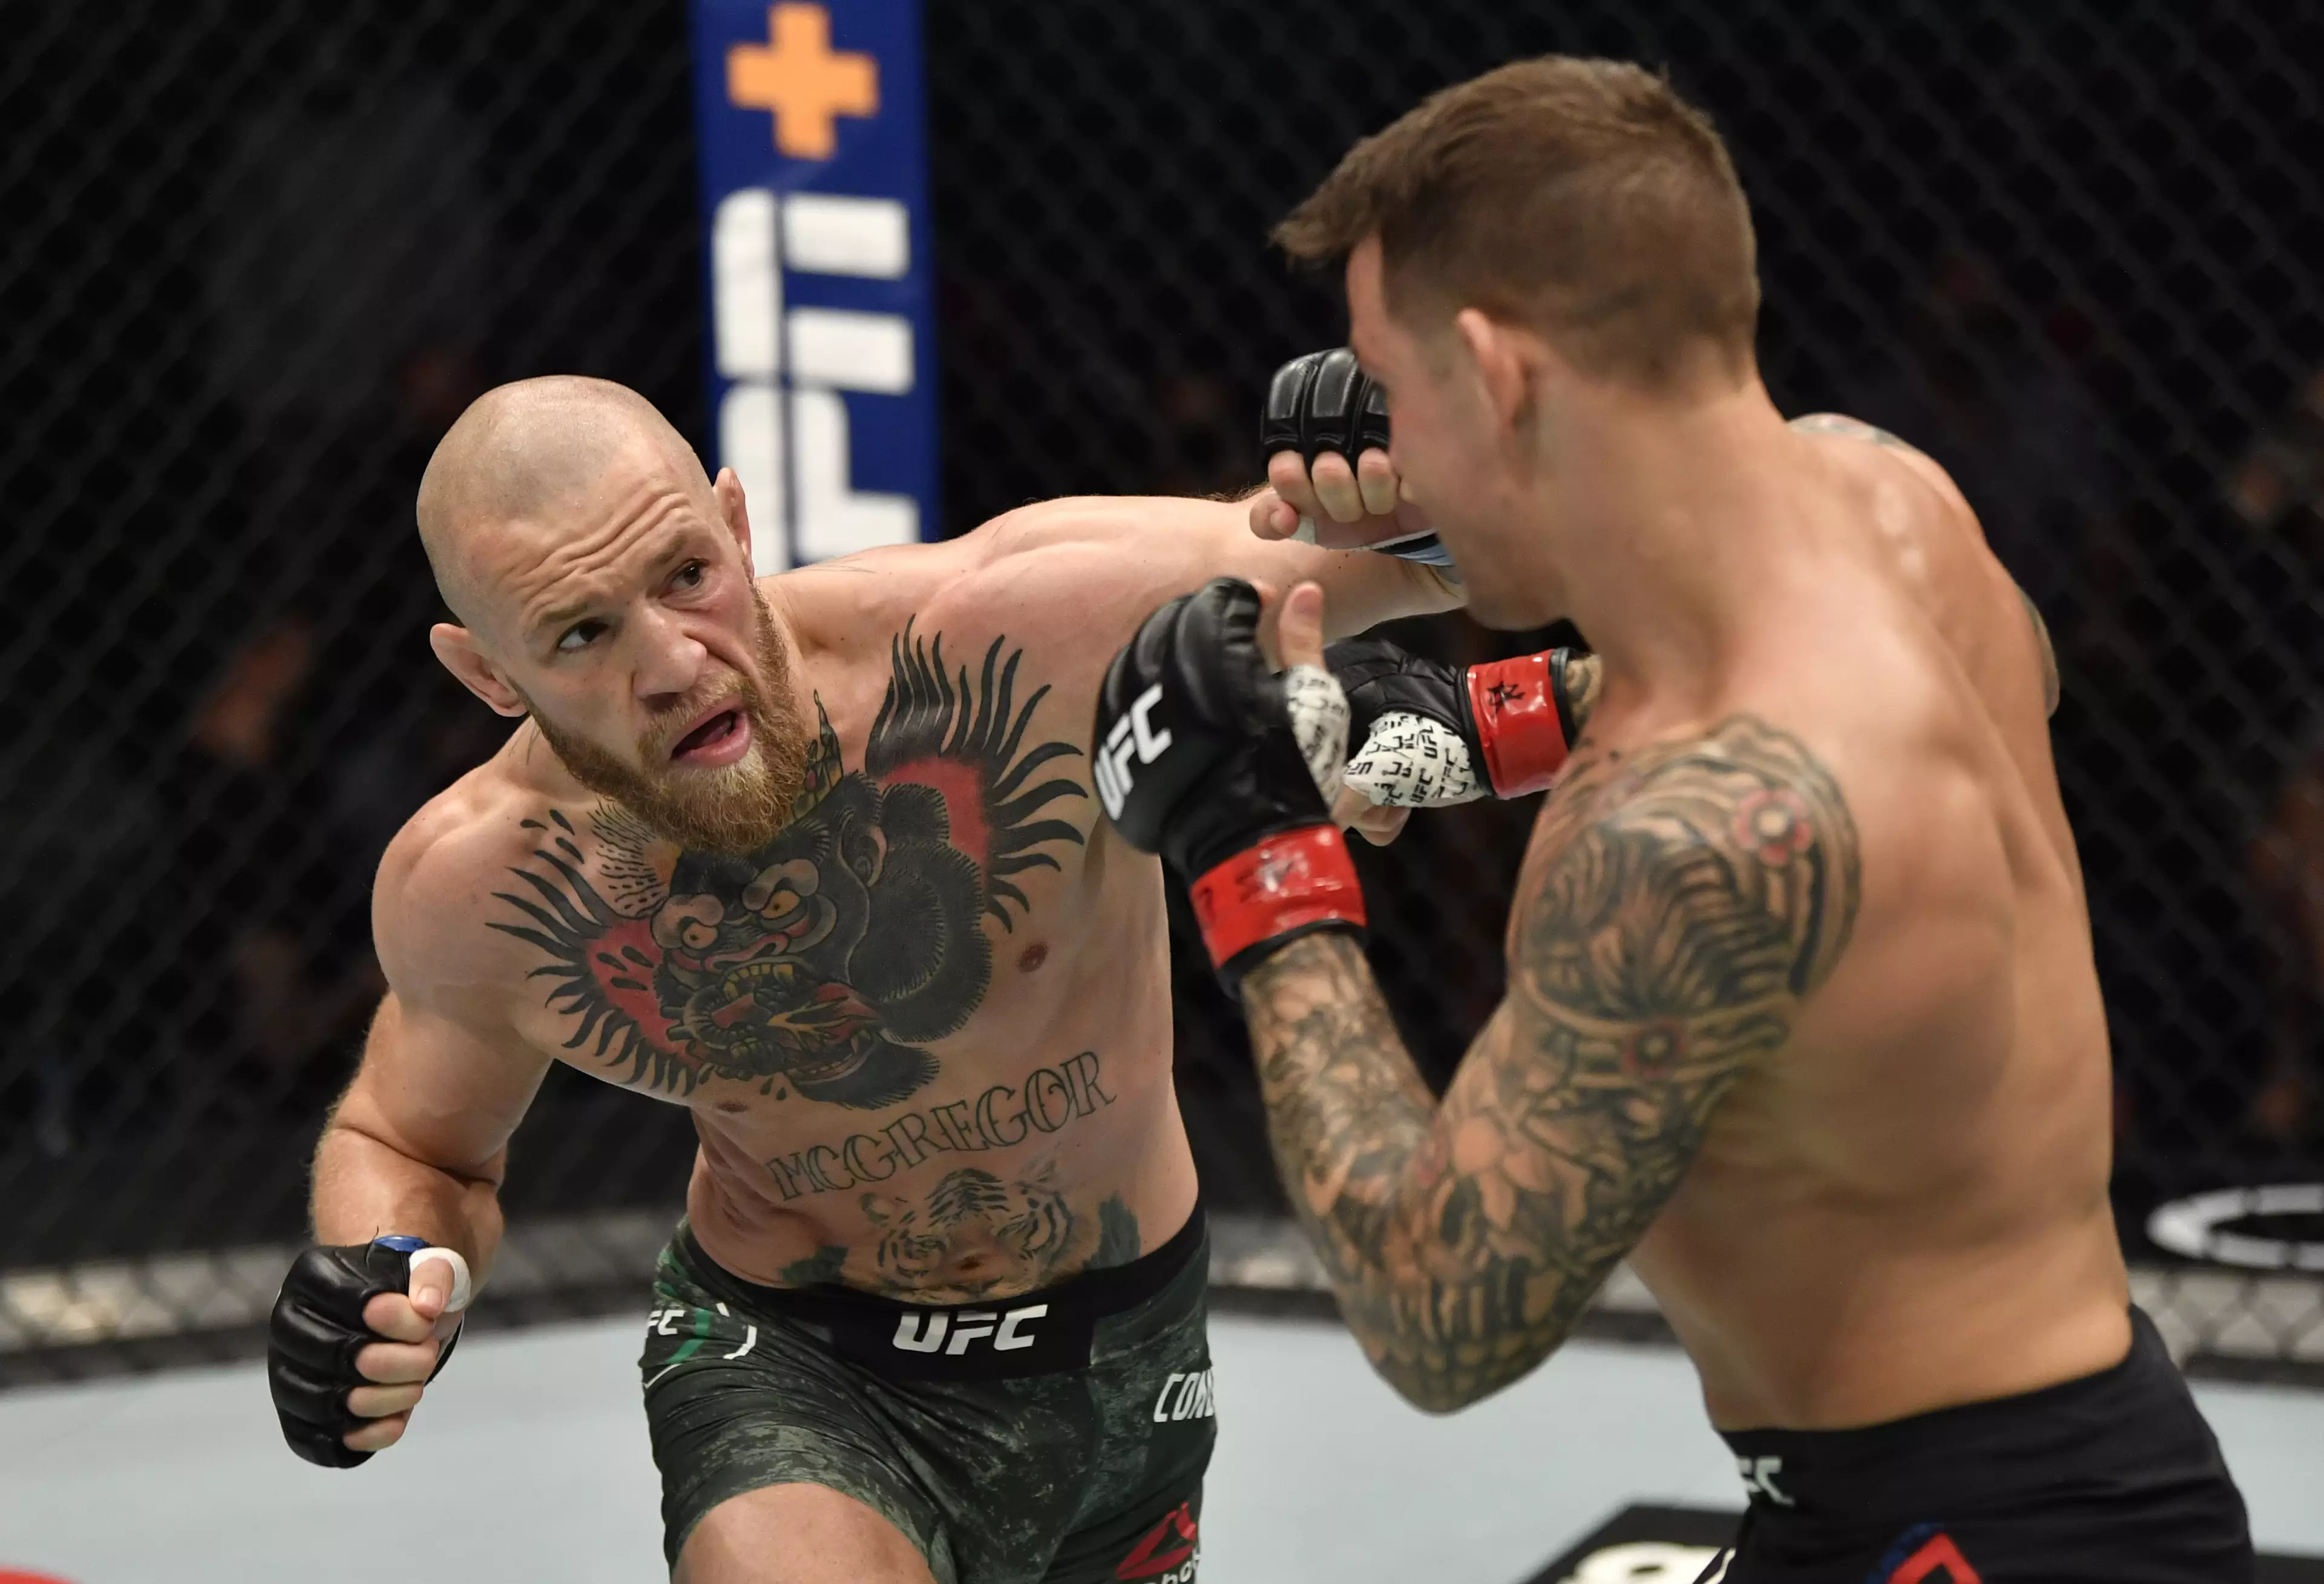 Conor McGregor in a fight against Dustin Poirier in January 2021.